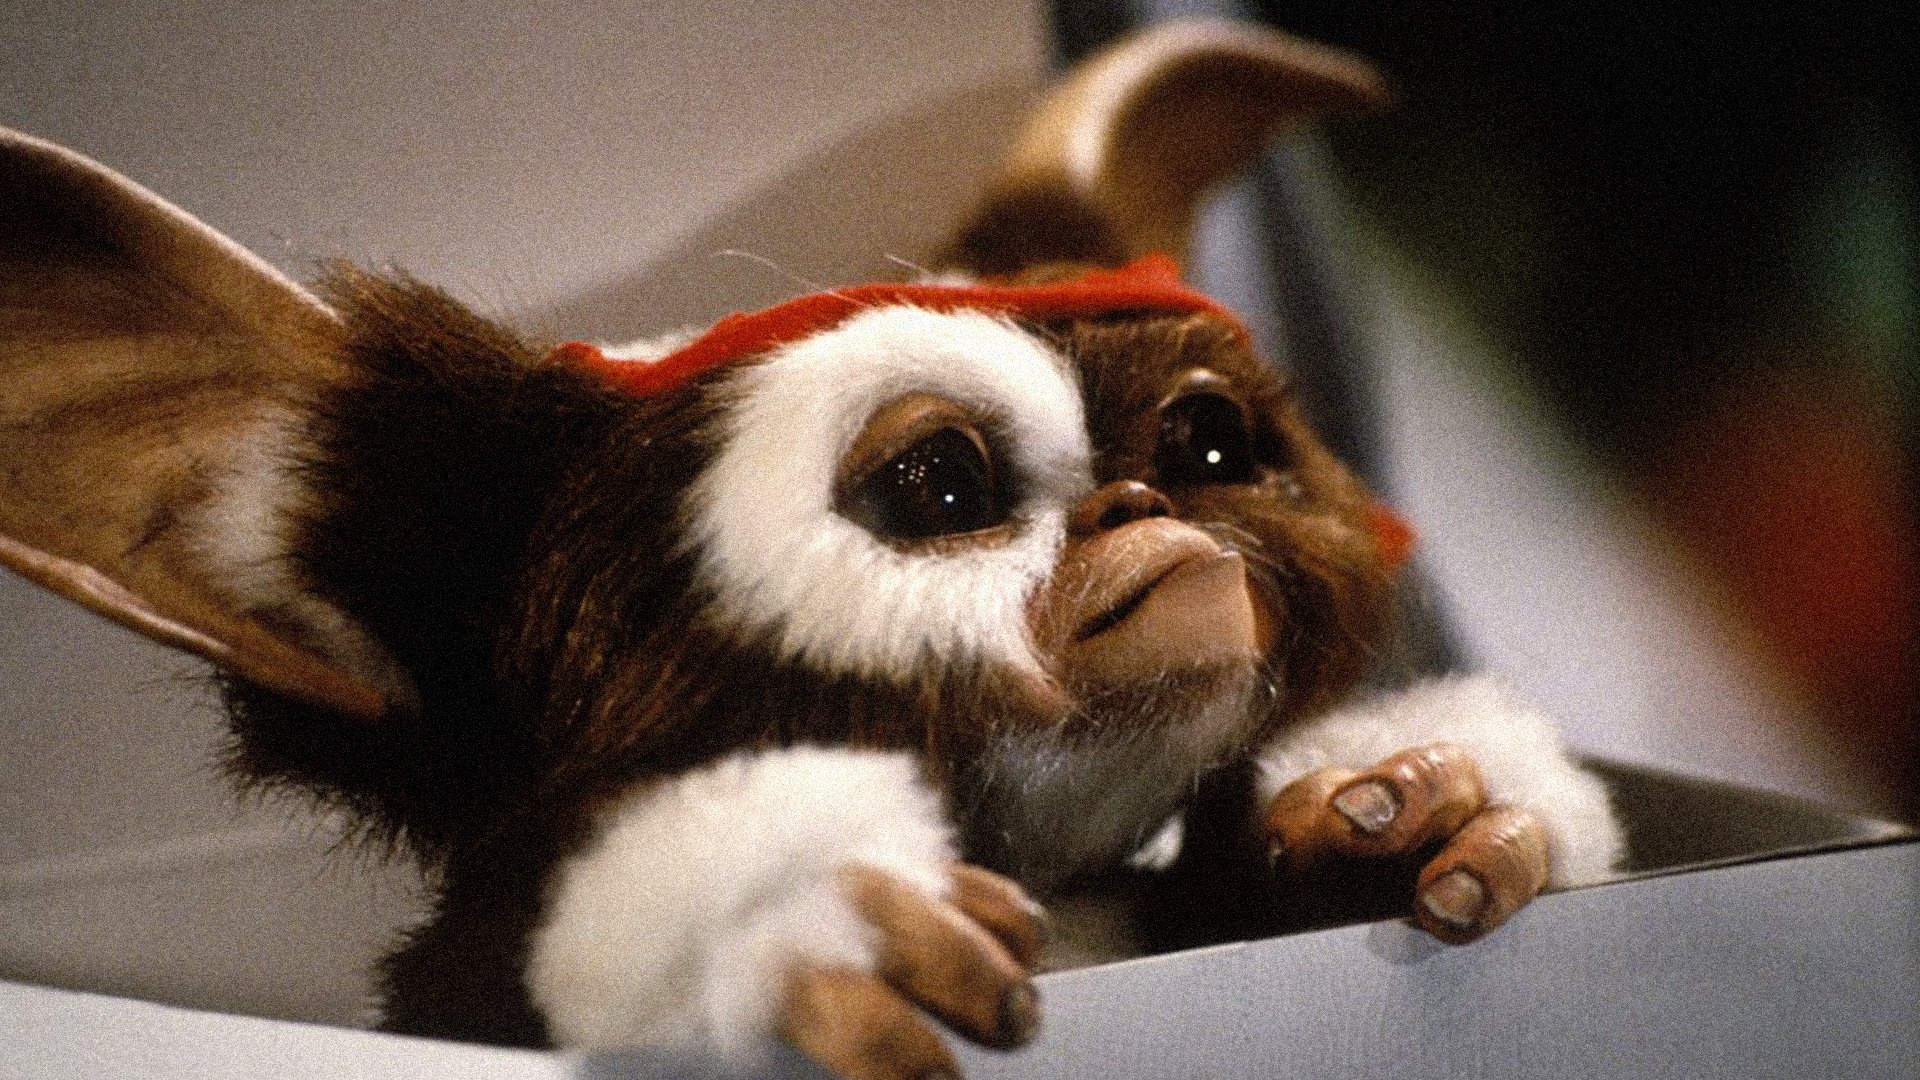 Gremlin Gizmo: Was created on an extraterrestrial planet by a placid scientist named Mogturmen. 1920x1080 Full HD Wallpaper.